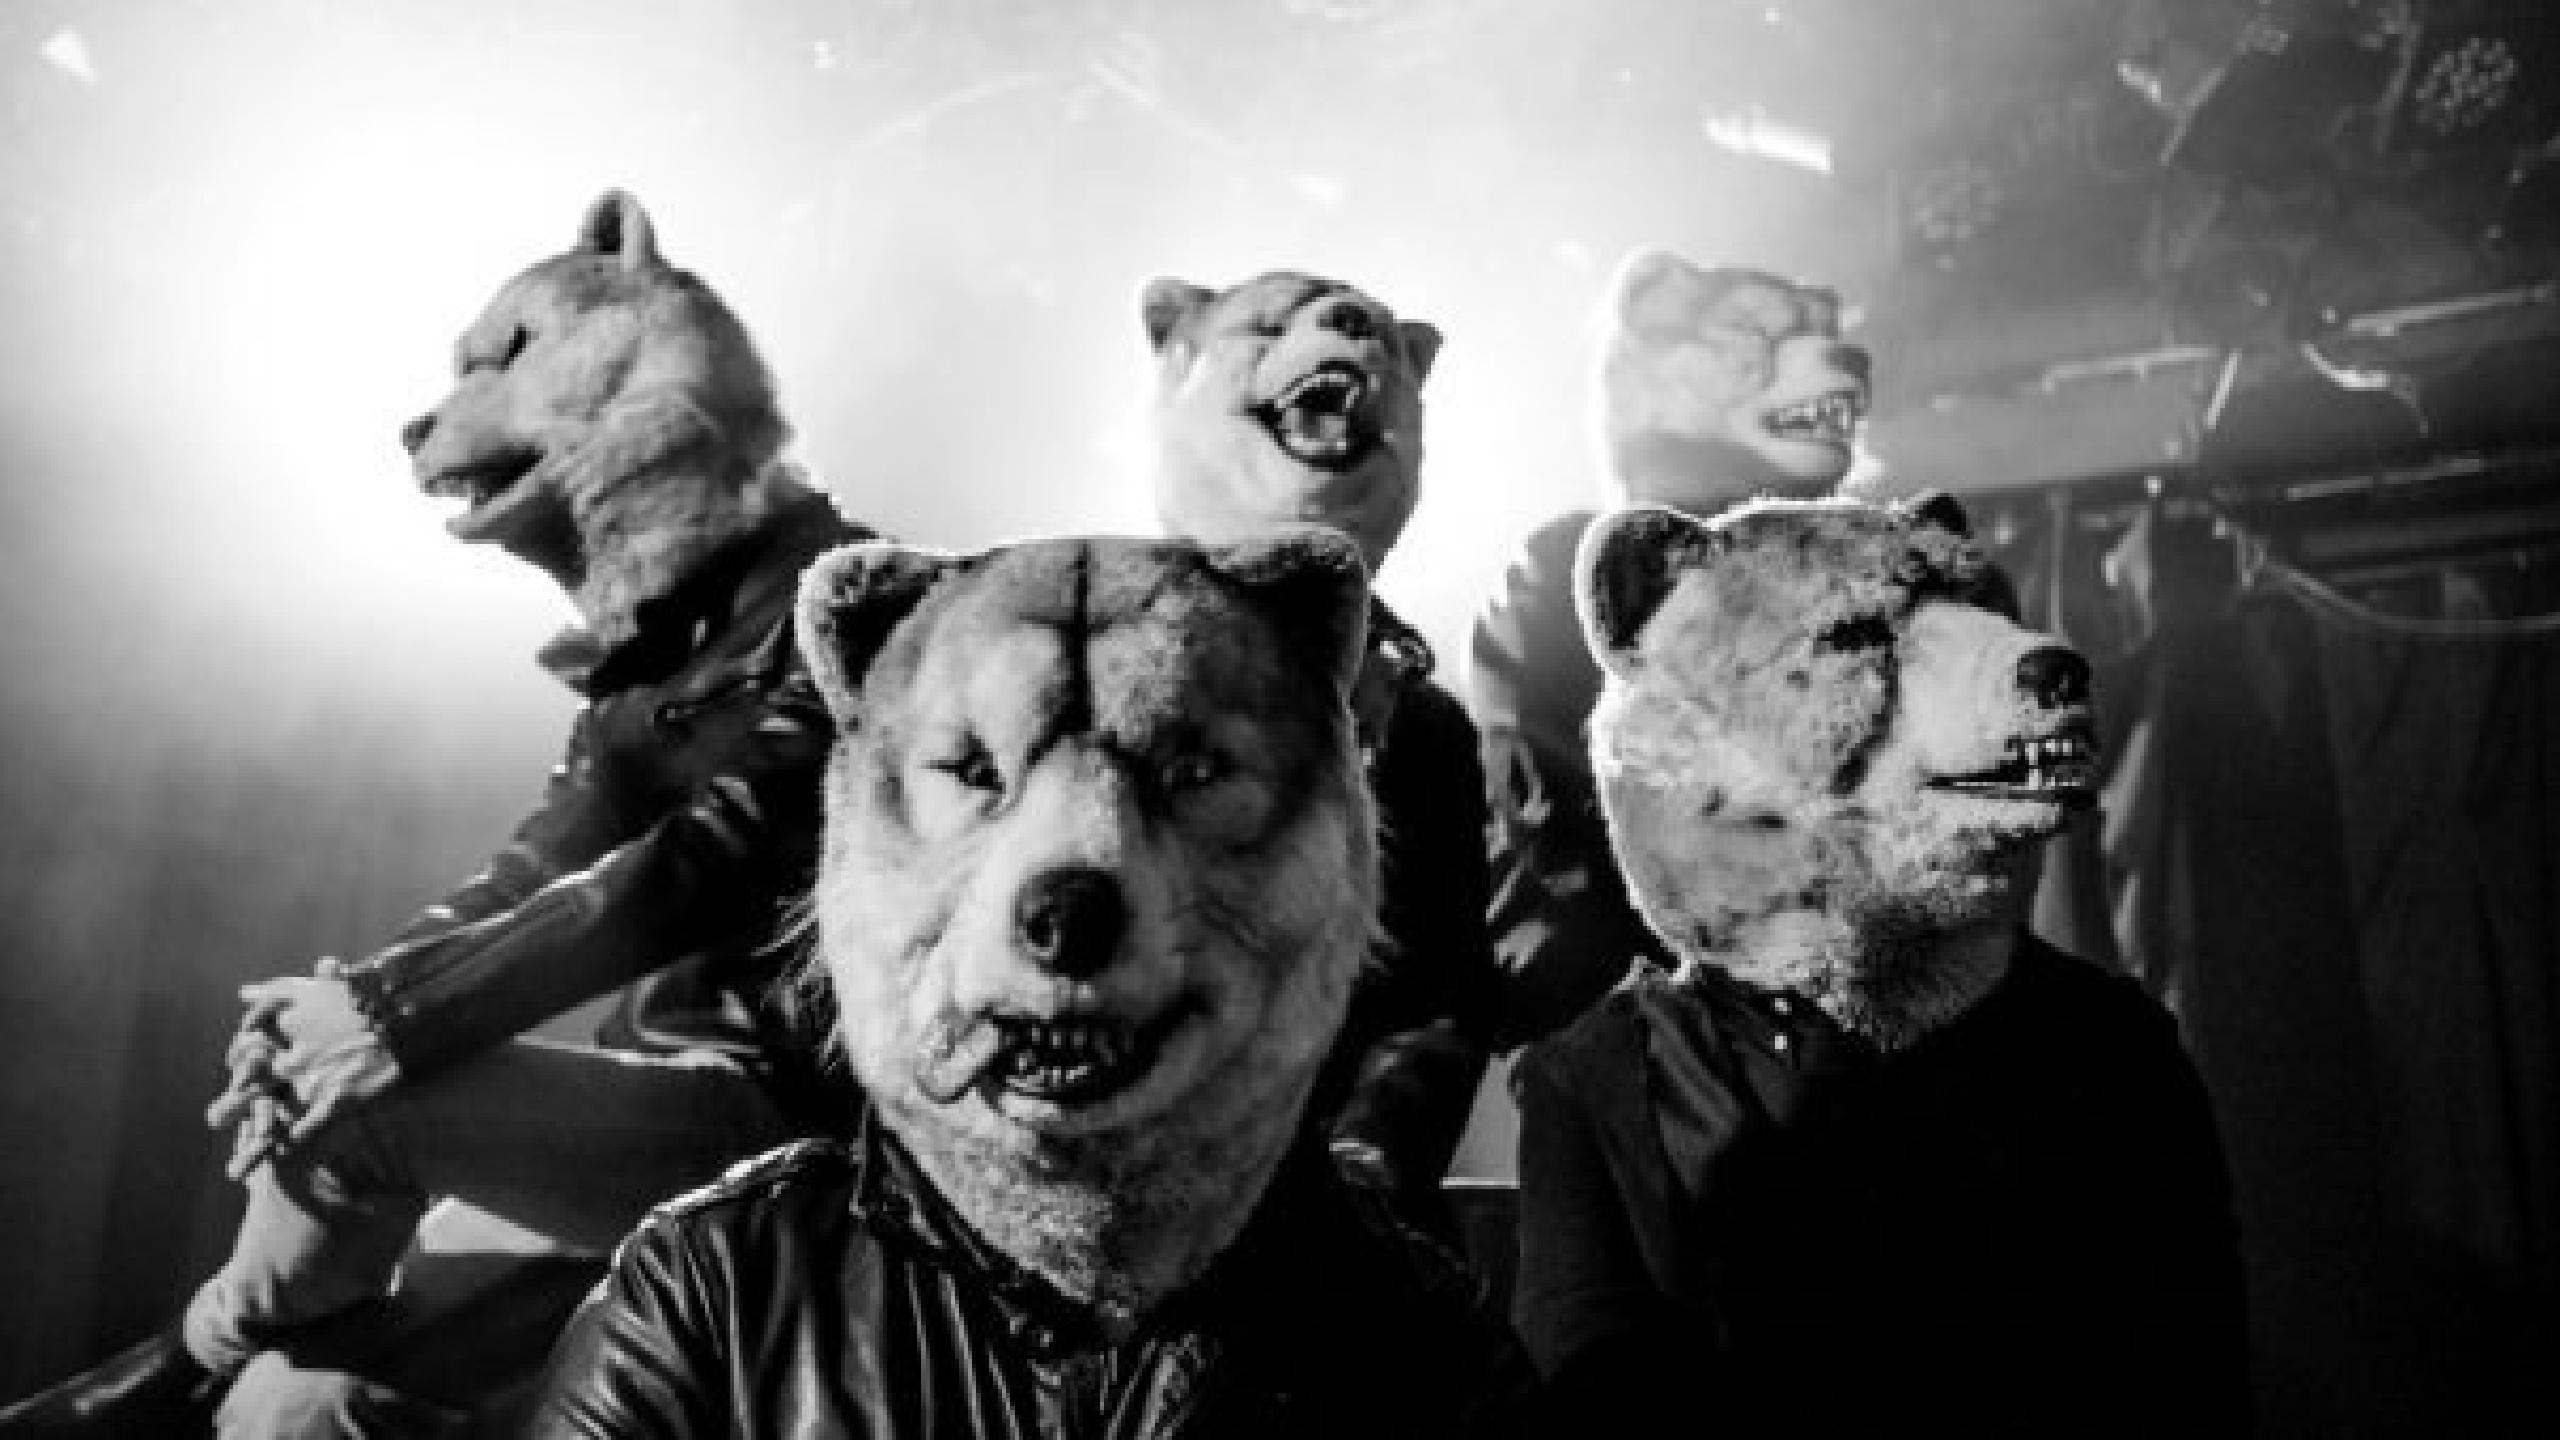 Man With A Mission Tour Dates 2020 2021 Man With A Mission Tickets And Concerts Wegow Canada